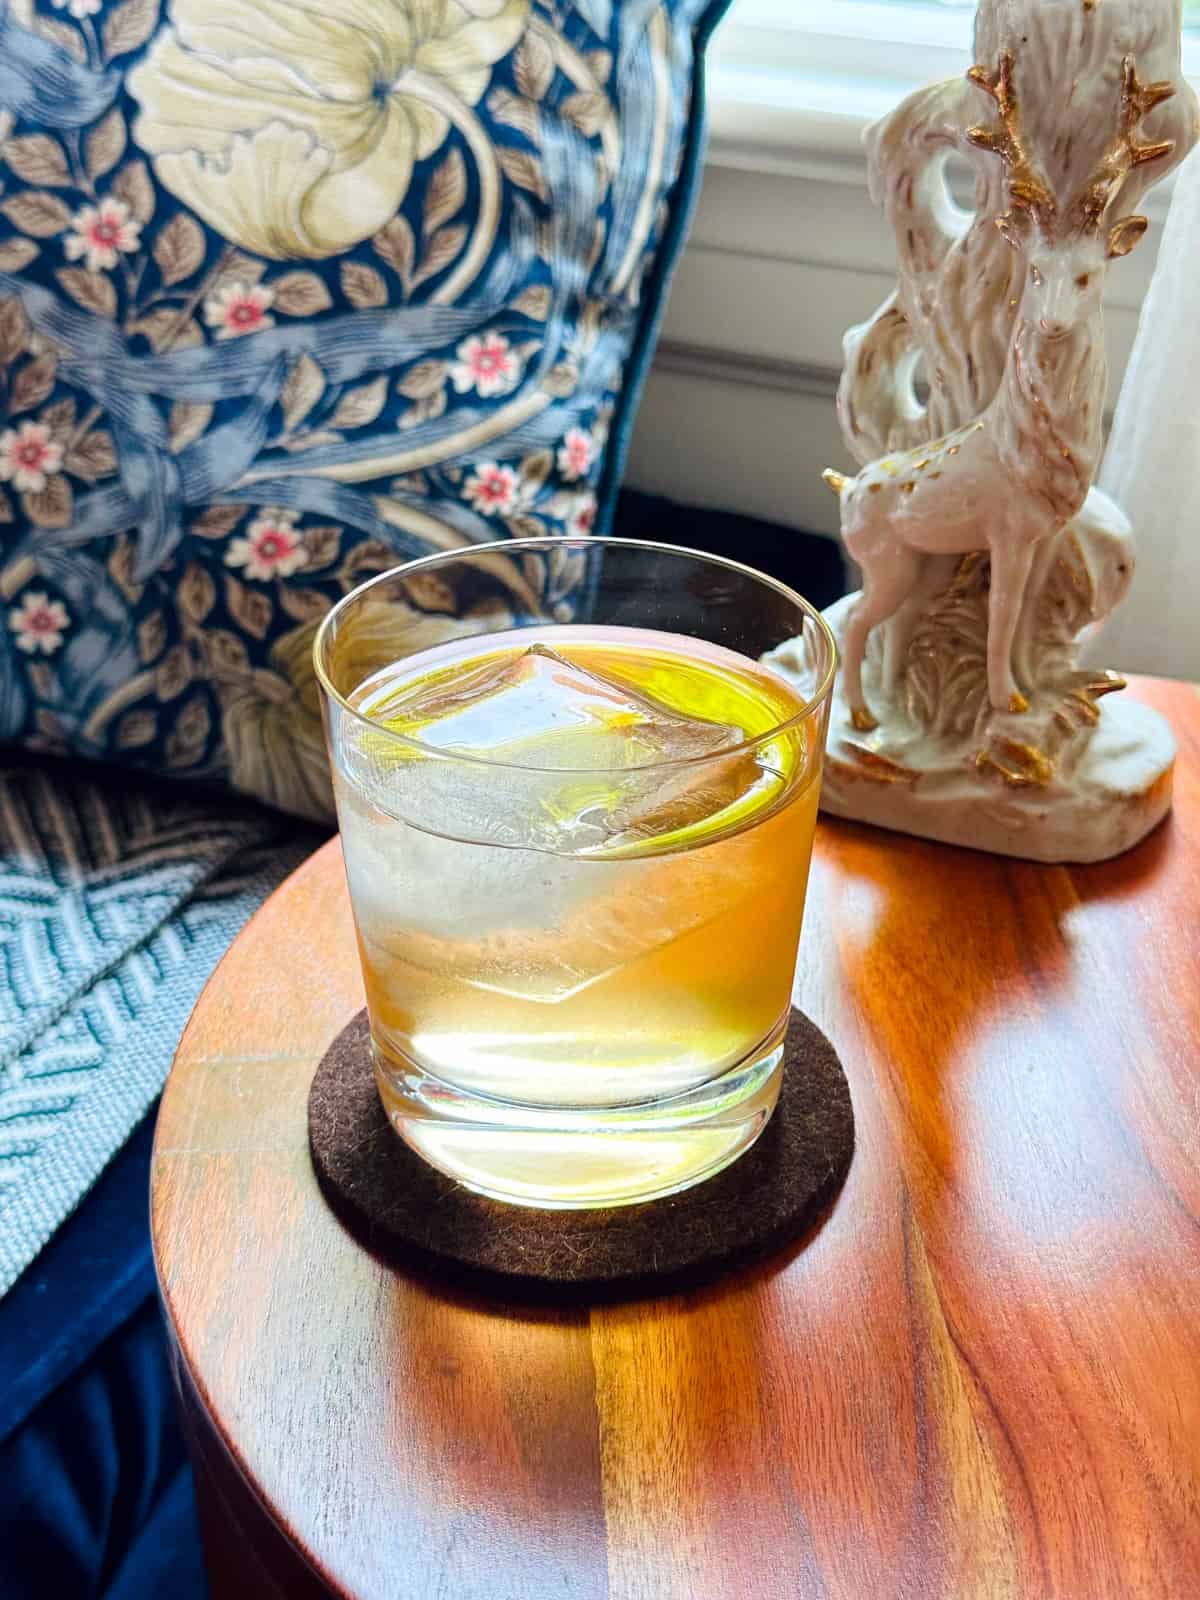 Umeshu Negroni in a rocks glass on a round wooden table next to a porcelain white and gold lamp in the shape of a stag with a blue and white flowered pillow in the background.